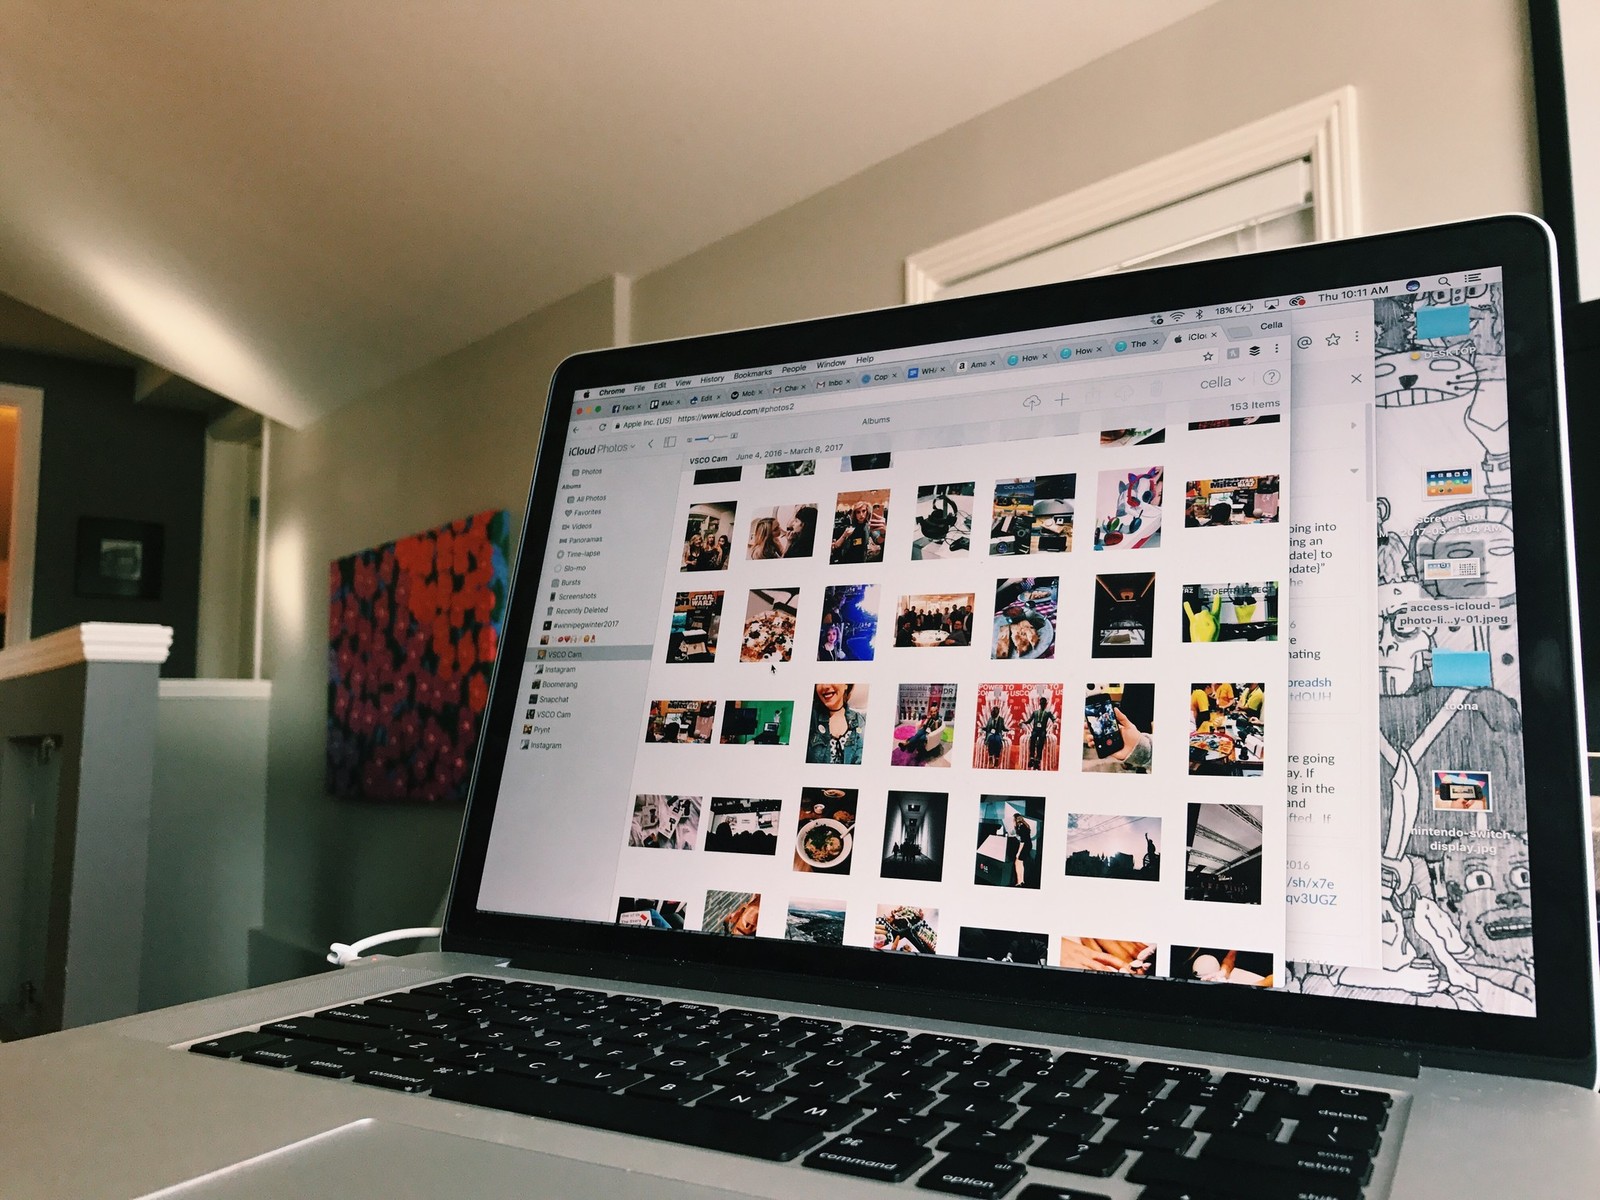 My Photo Stream Vs. ICloud Photo Library: What’s The Difference?